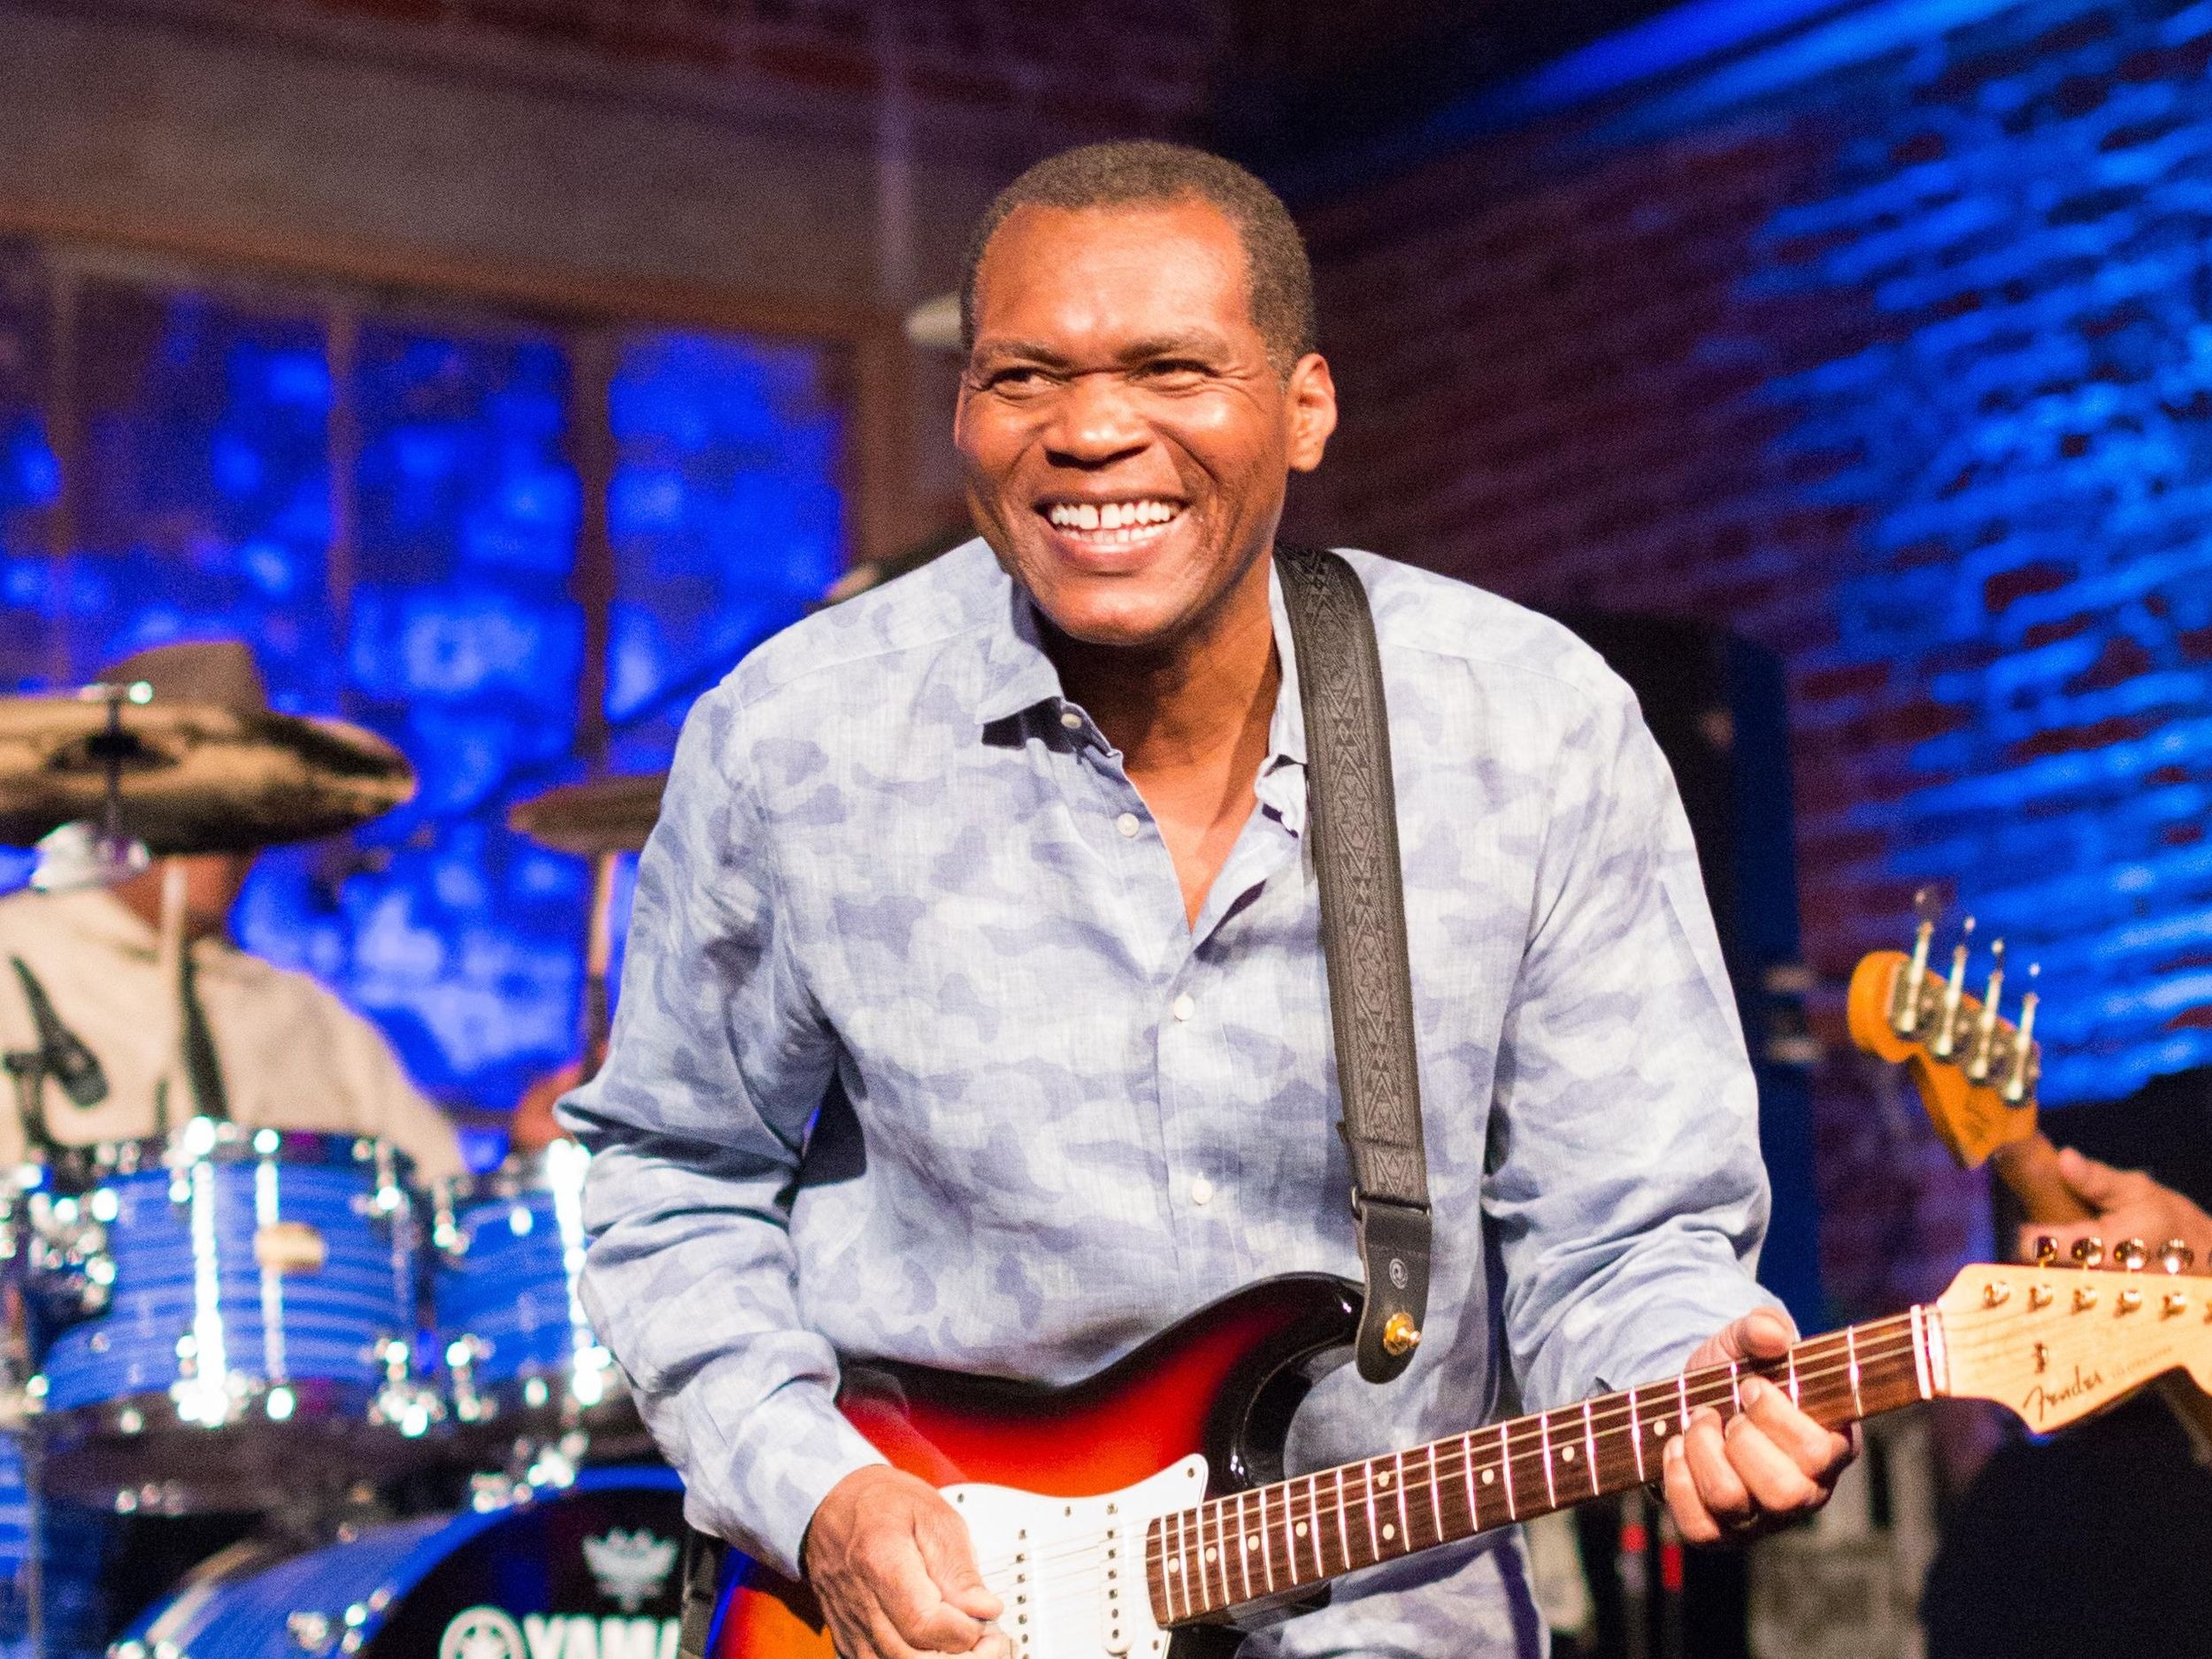 10 Best Robert Cray Band Songs of All Time